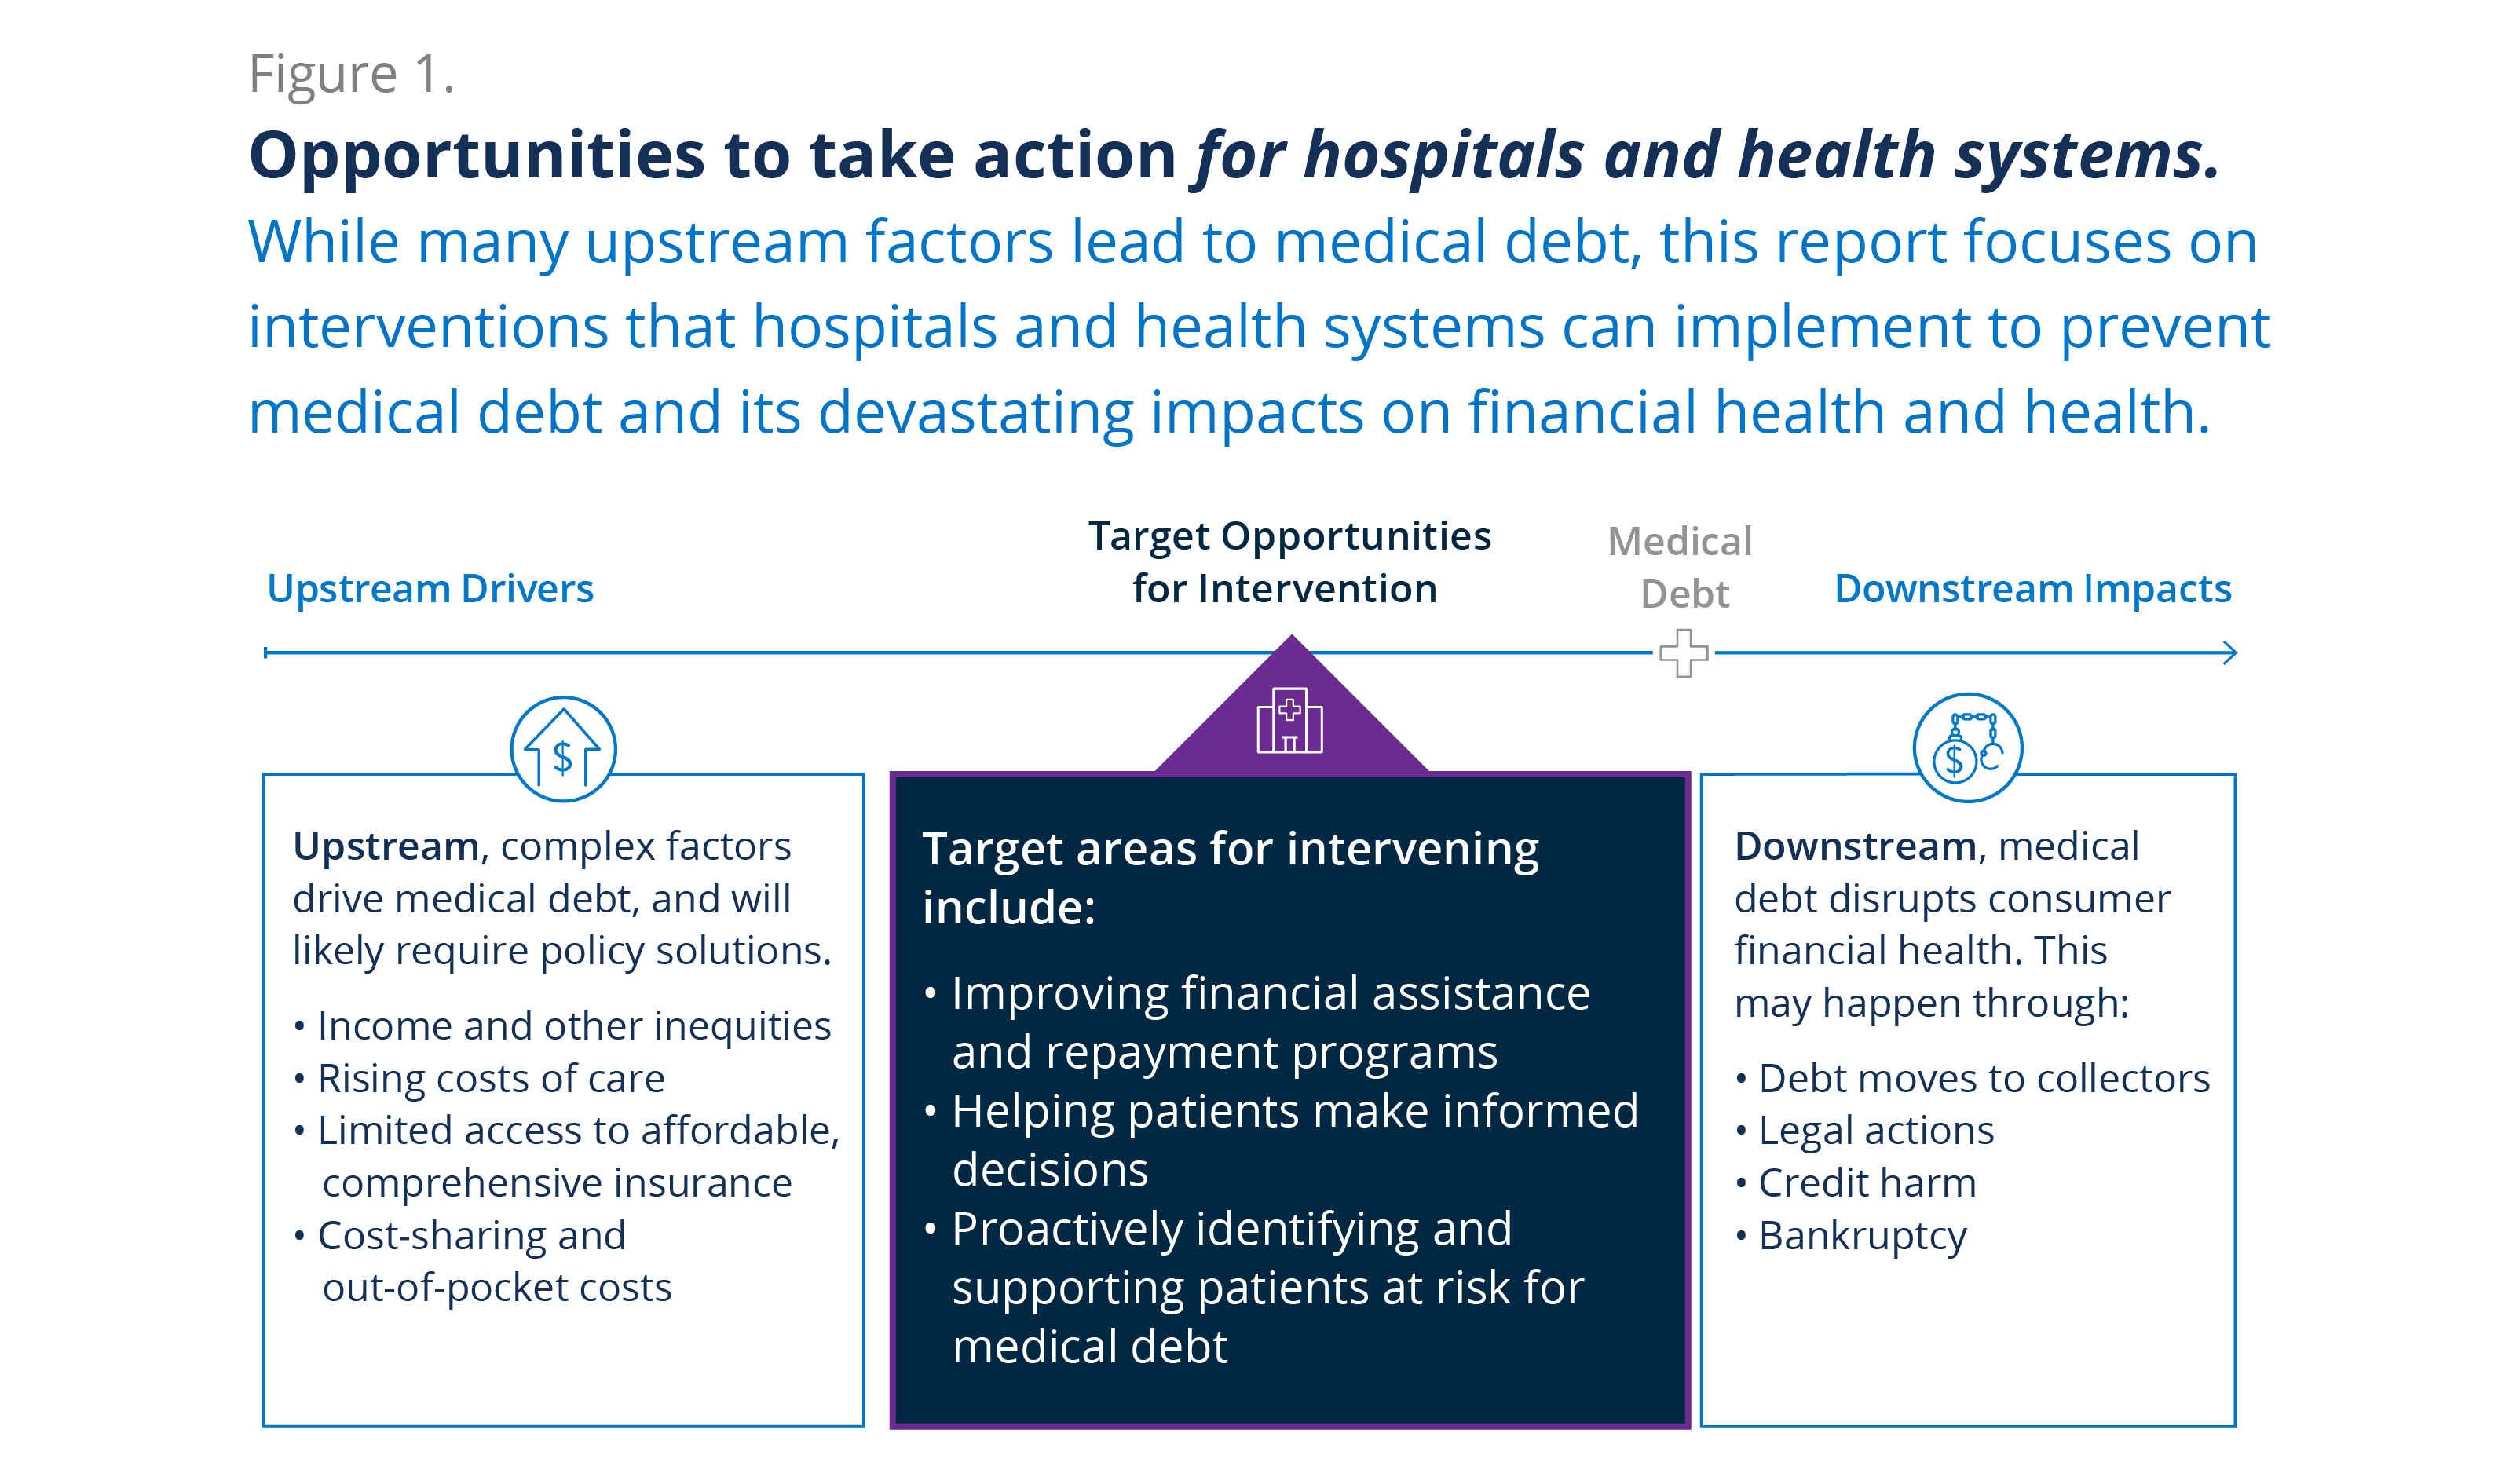 Opportunities to take action for hospitals and health systems - While many upstream factors contribute to medical debt, this report focuses on interventions that hospitals health systems can implement to prevent medical debt and its devastating impacts on financial health and health